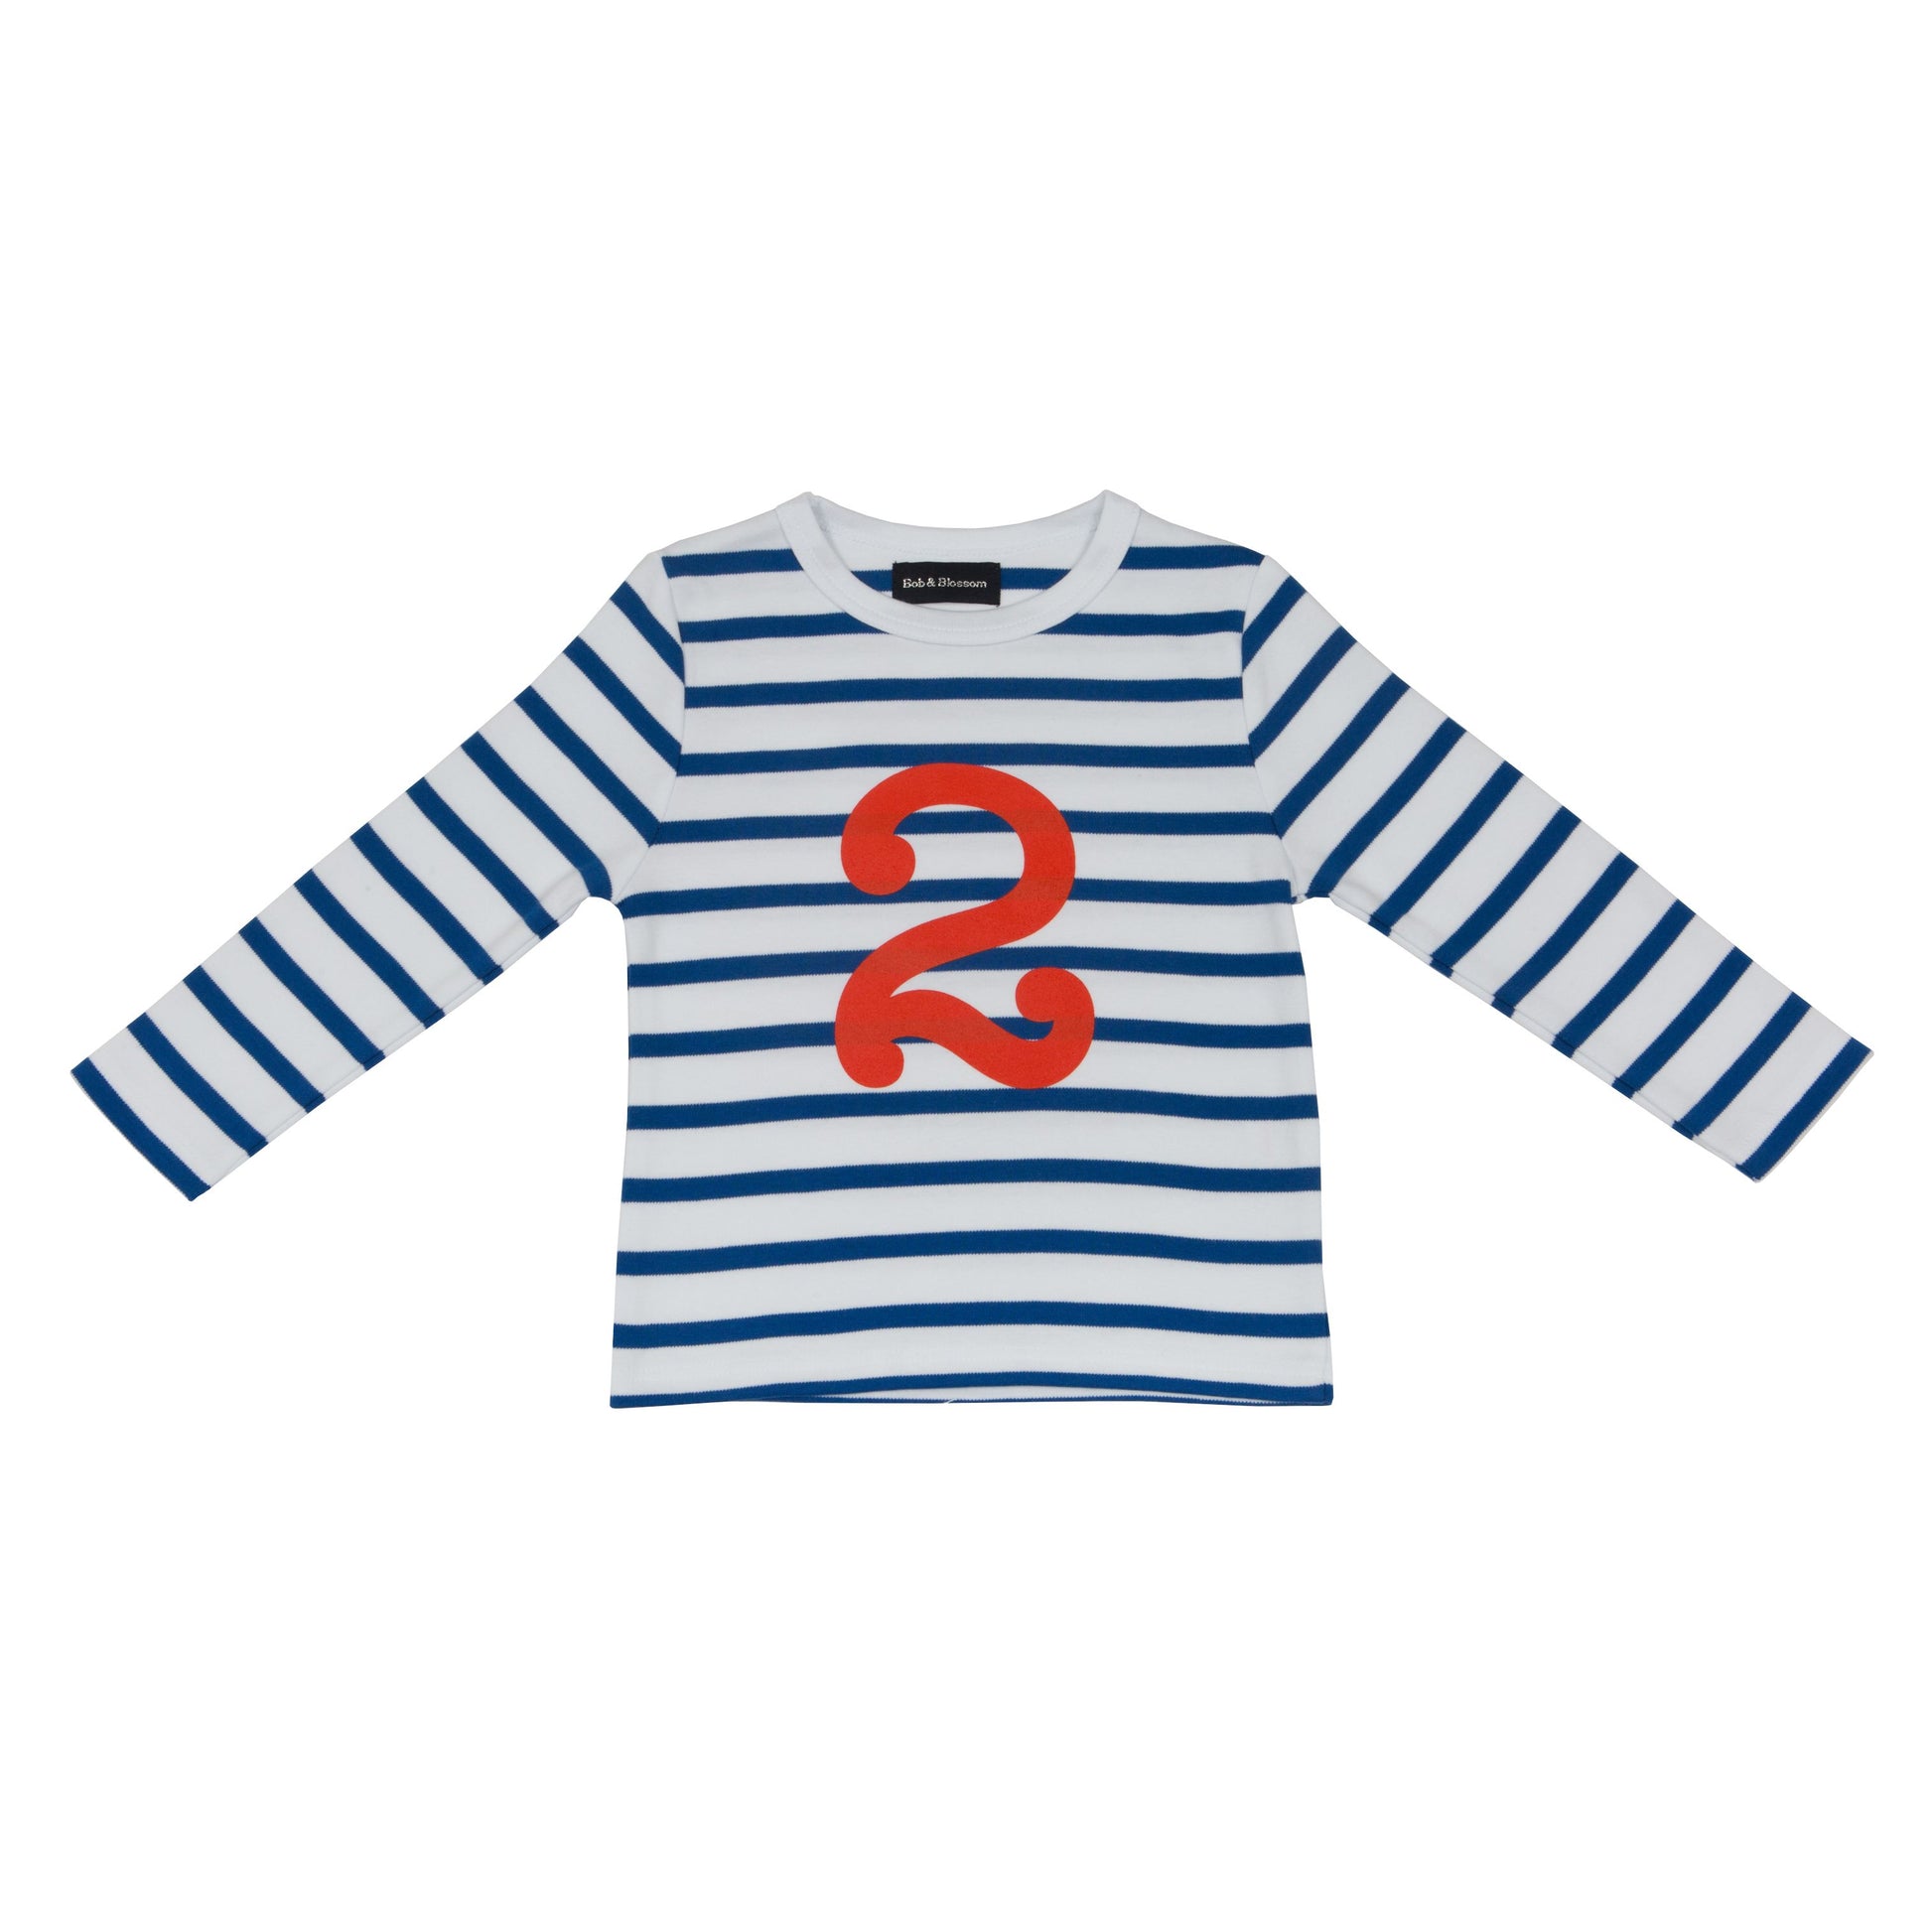 french blue and white striped t shirt with bright red number 2 on the front